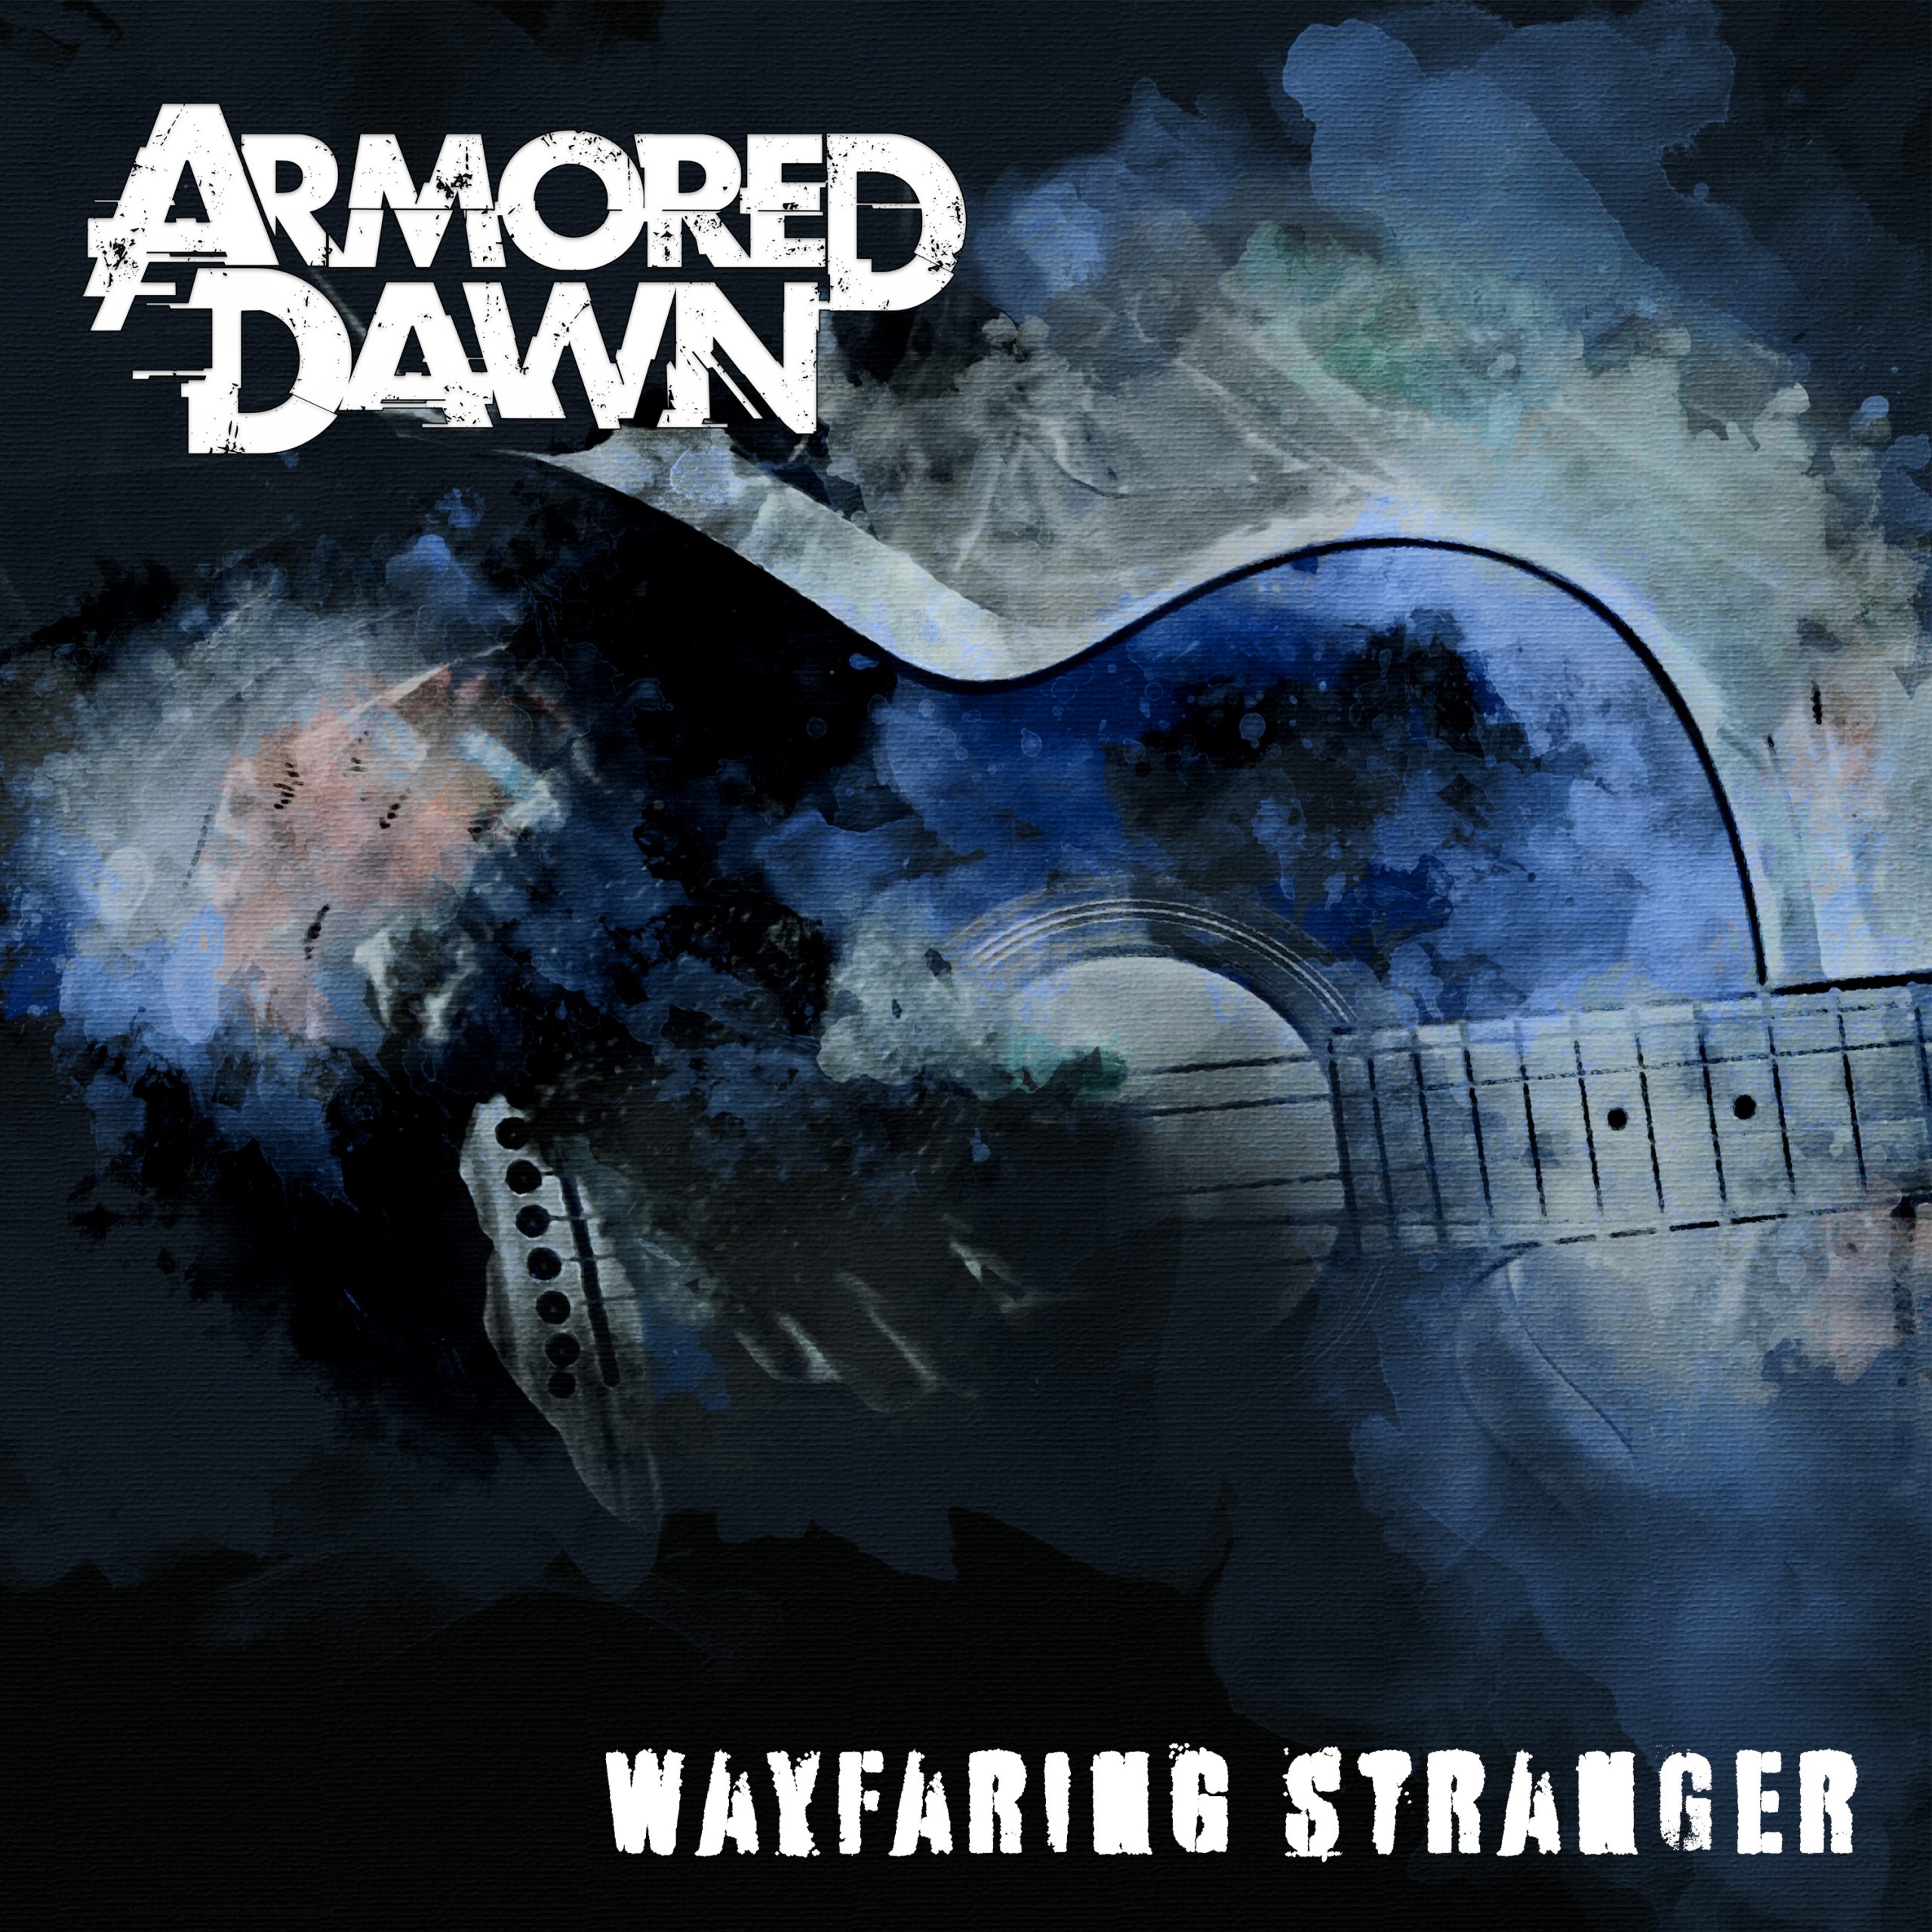 ‘Armored Dawn’ release uplifting and addictive cover version of ‘Johnny Cash’ song ‘Wayfaring Stranger’ on the playlist now.